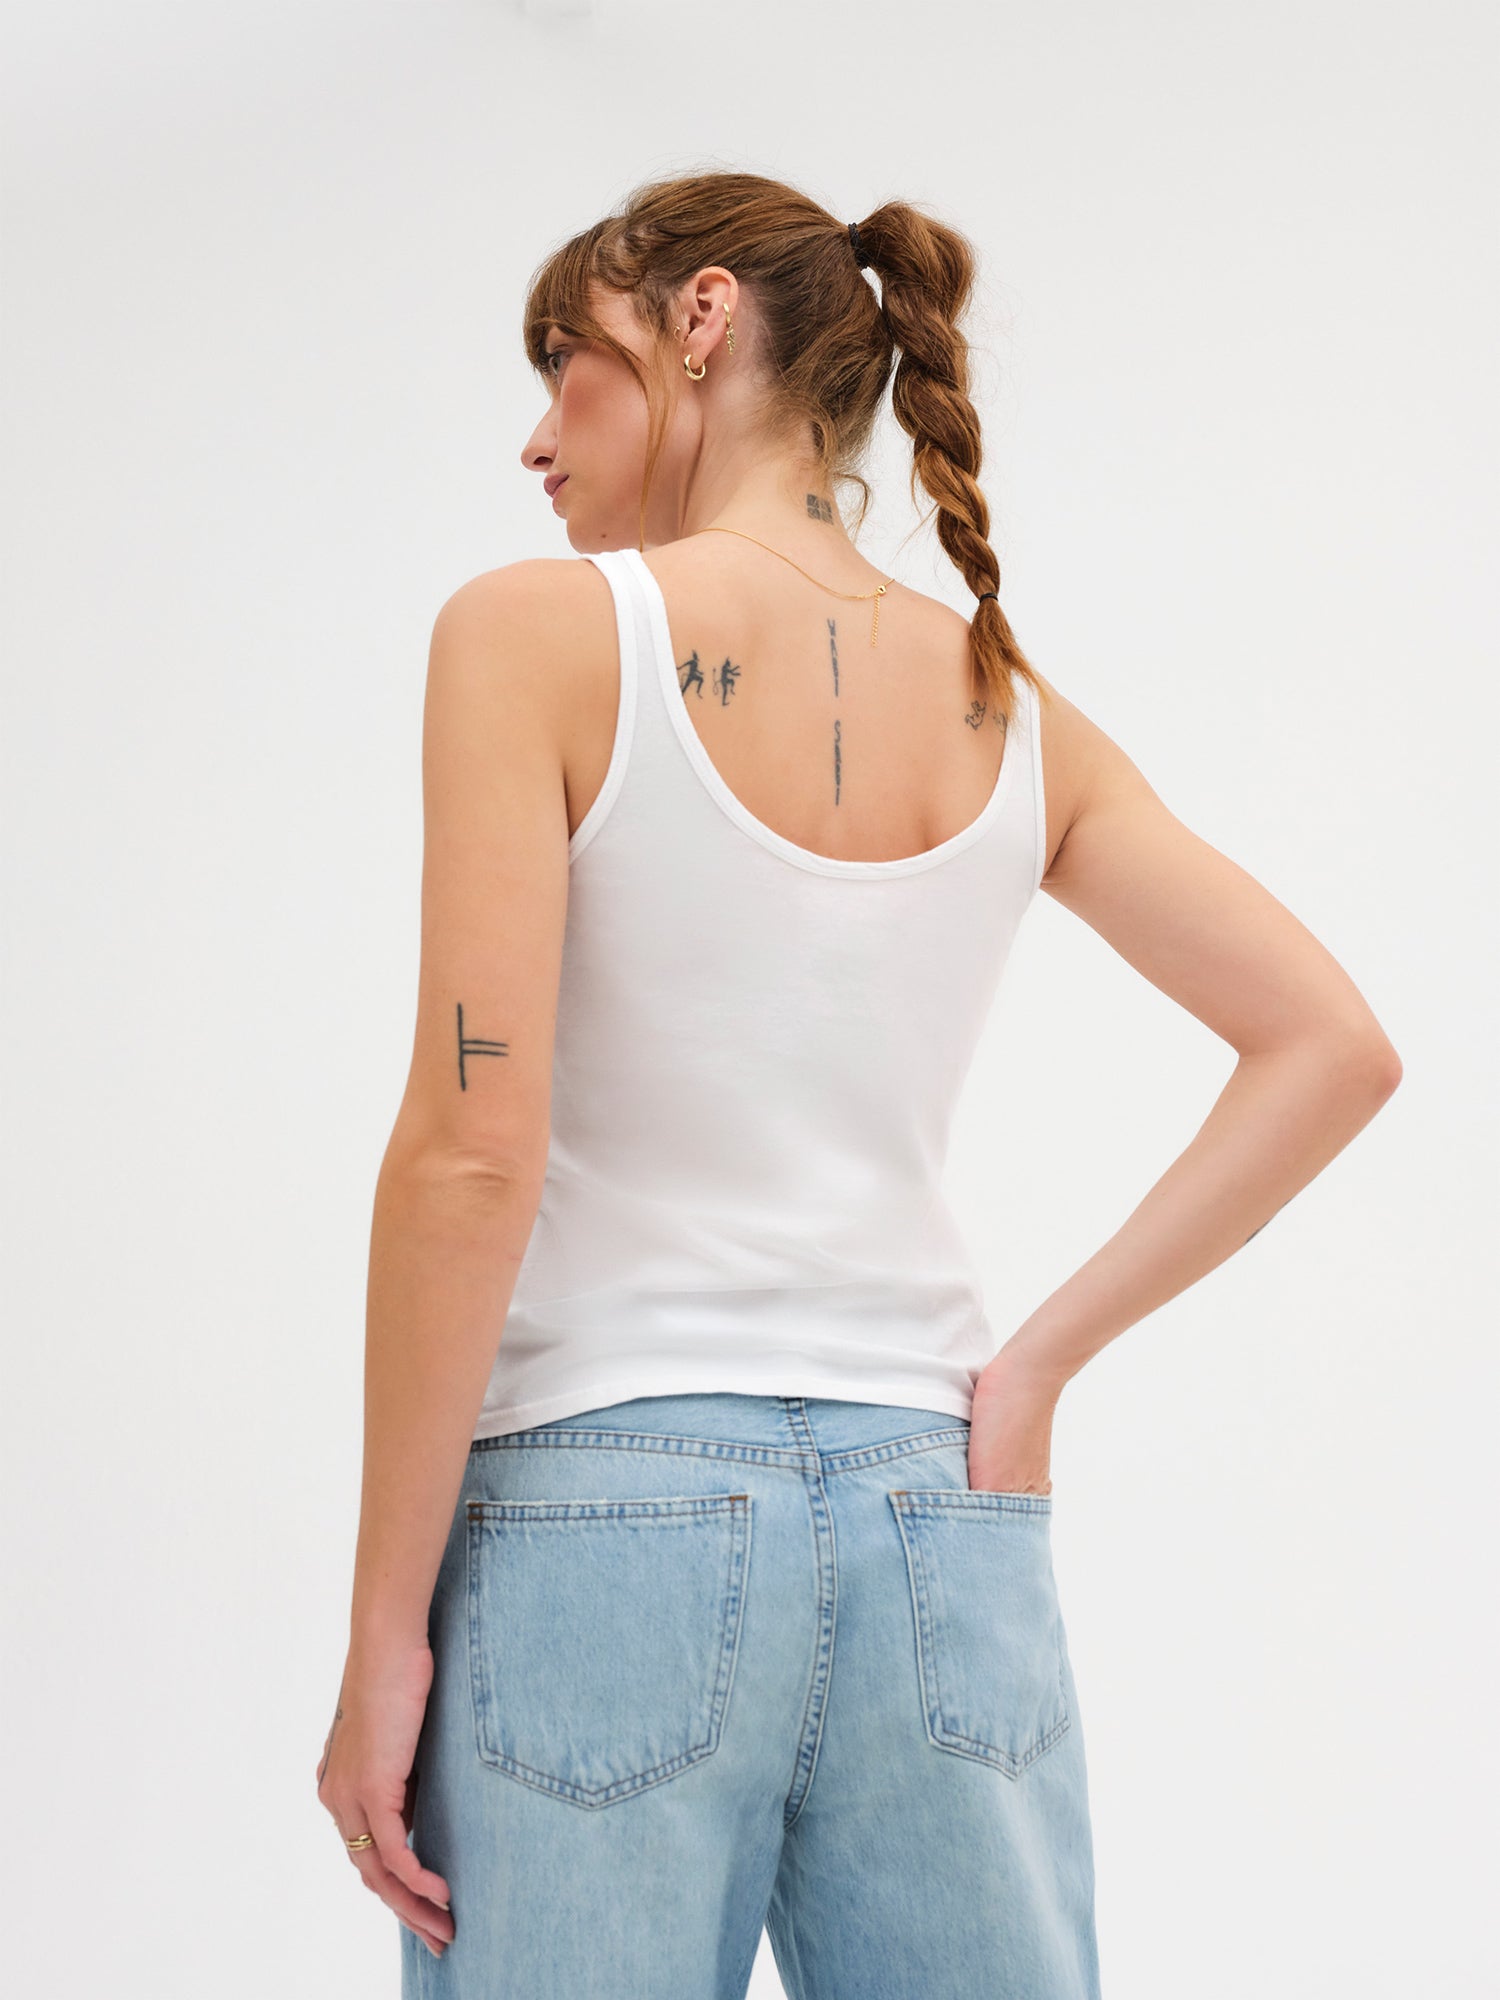 FREE Tank Top with $25 Order  Best Layering Cami For Women – MomMe and More